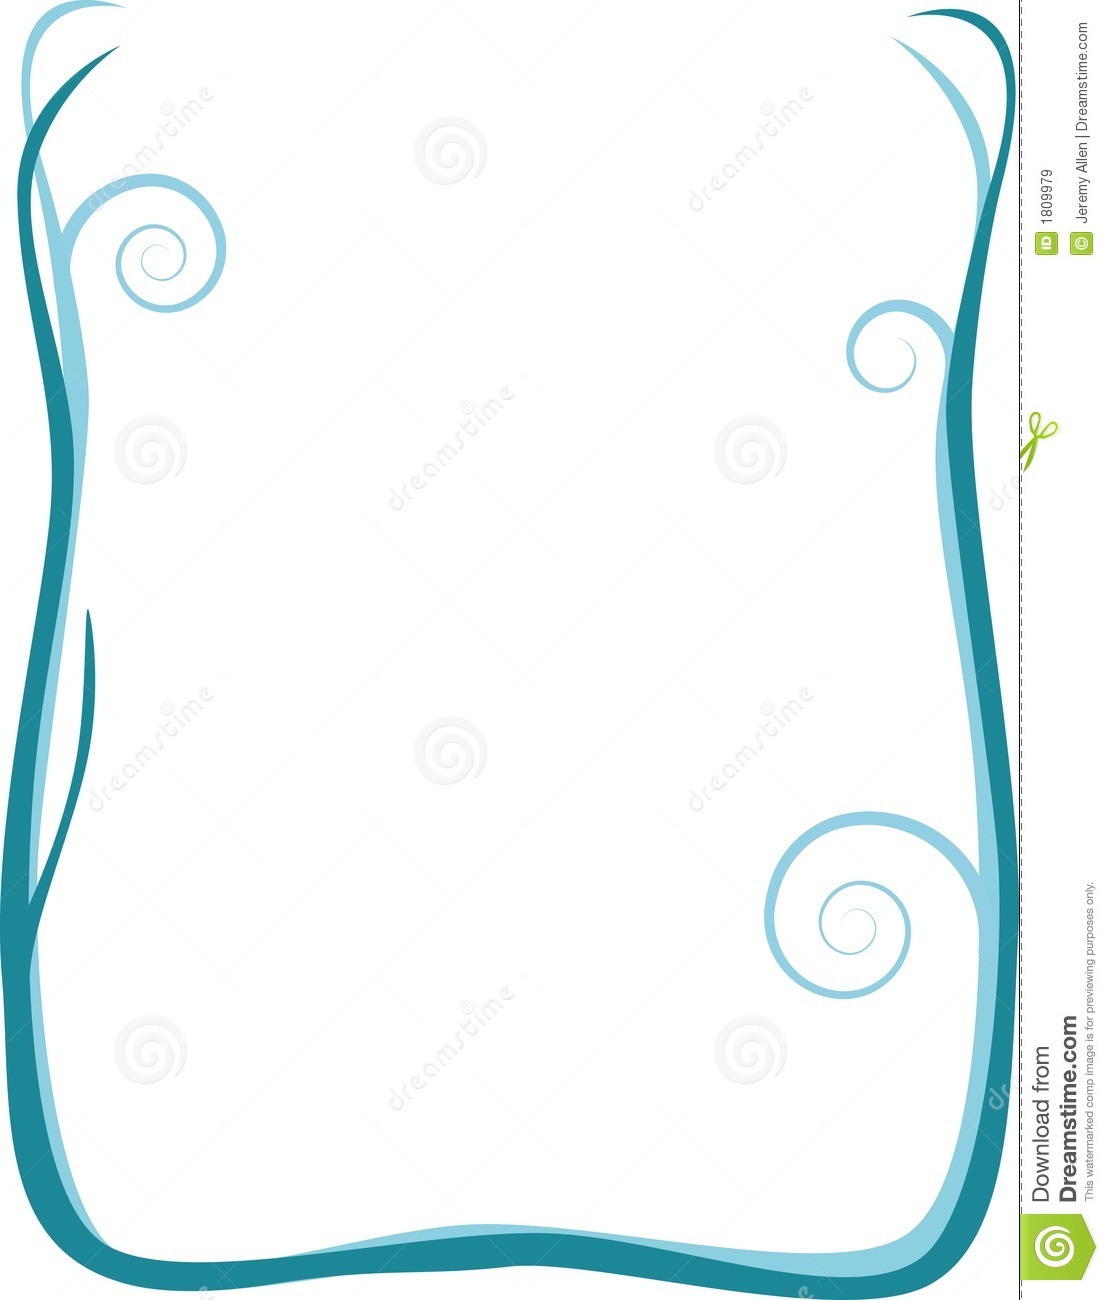 Spiral Border Royalty Free Stock Images   Image  1809979